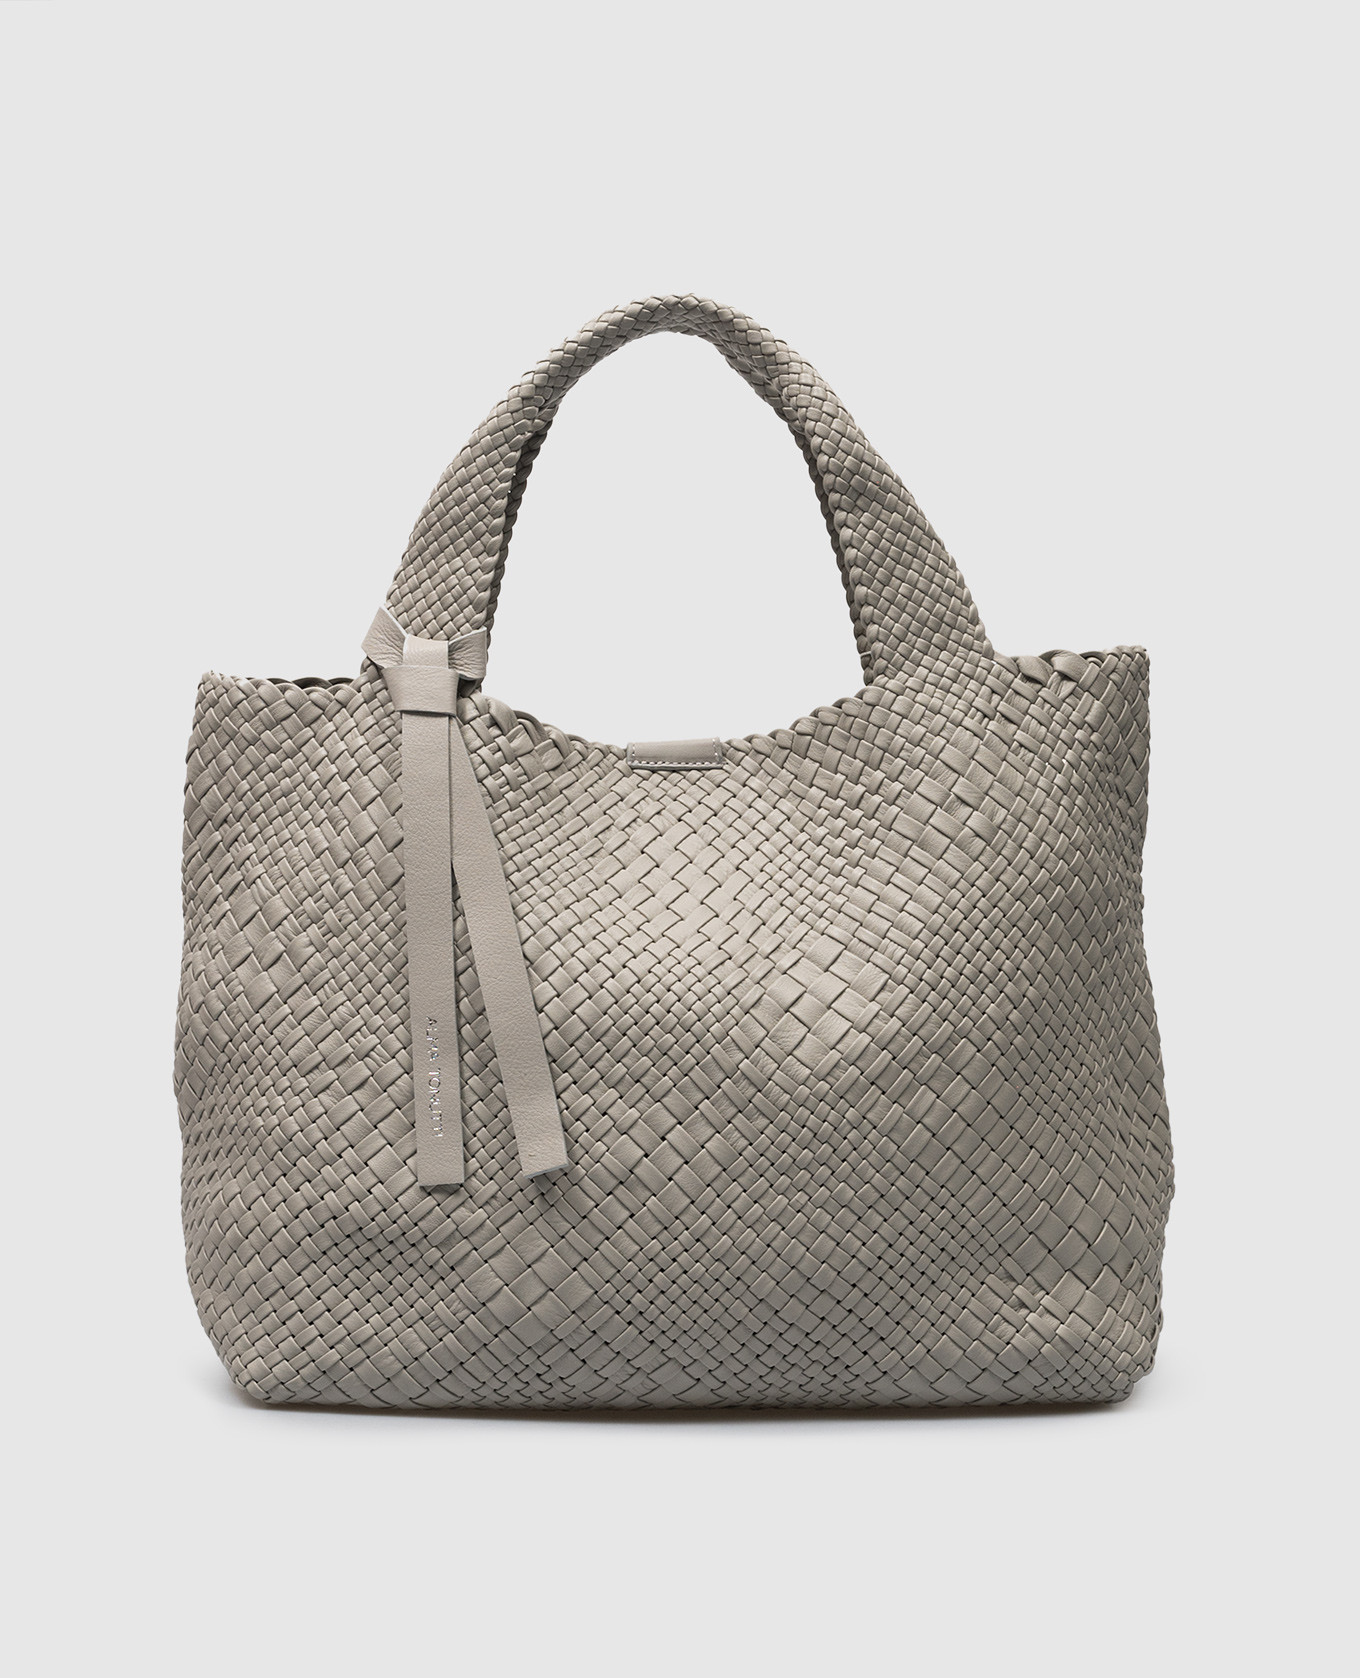 Gray leather tote bag with weaving